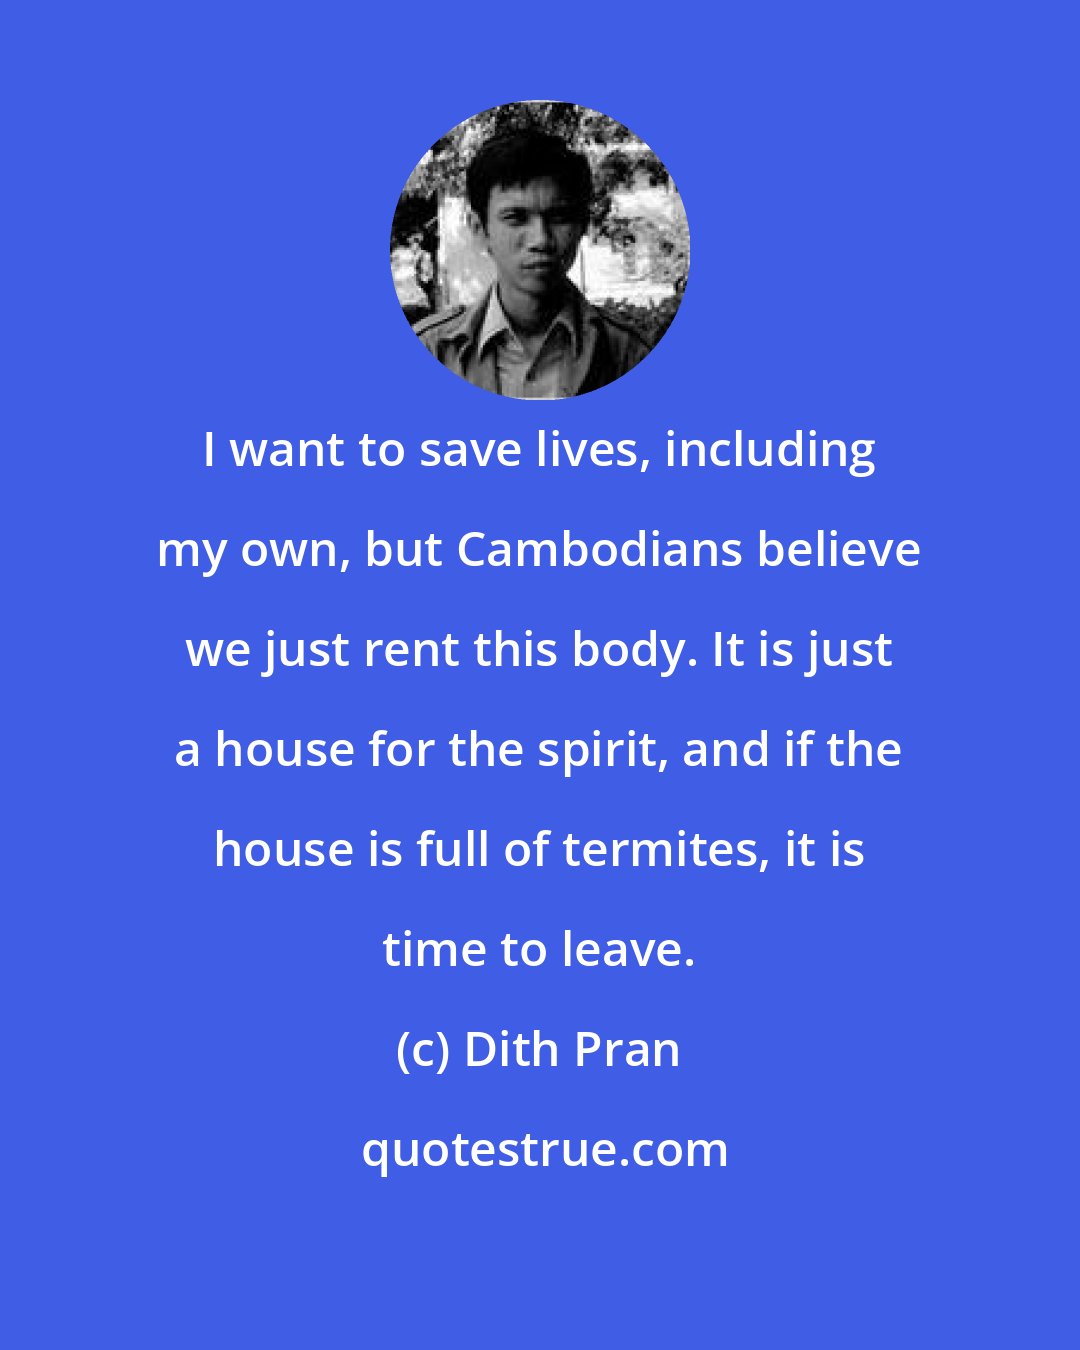 Dith Pran: I want to save lives, including my own, but Cambodians believe we just rent this body. It is just a house for the spirit, and if the house is full of termites, it is time to leave.